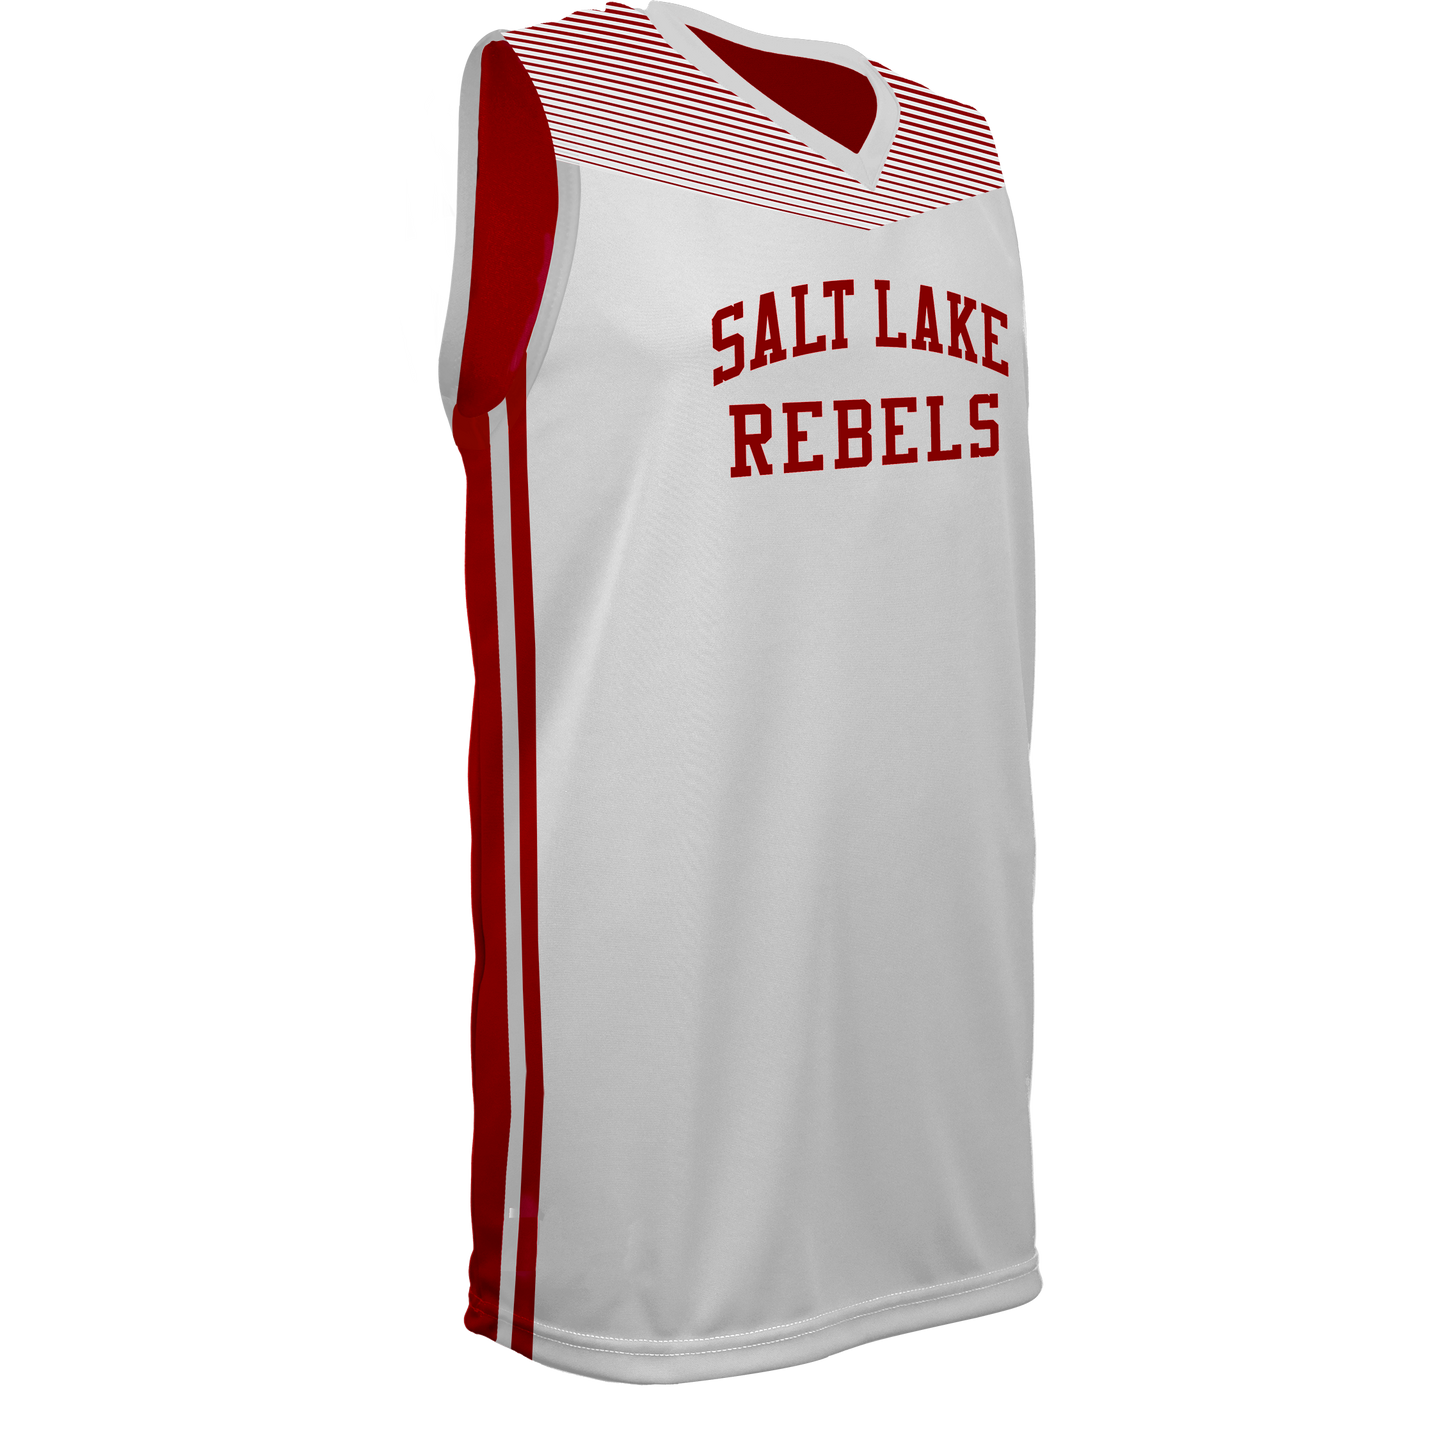 NEW Youth SLC Rebels Reversible Basketball Jersey